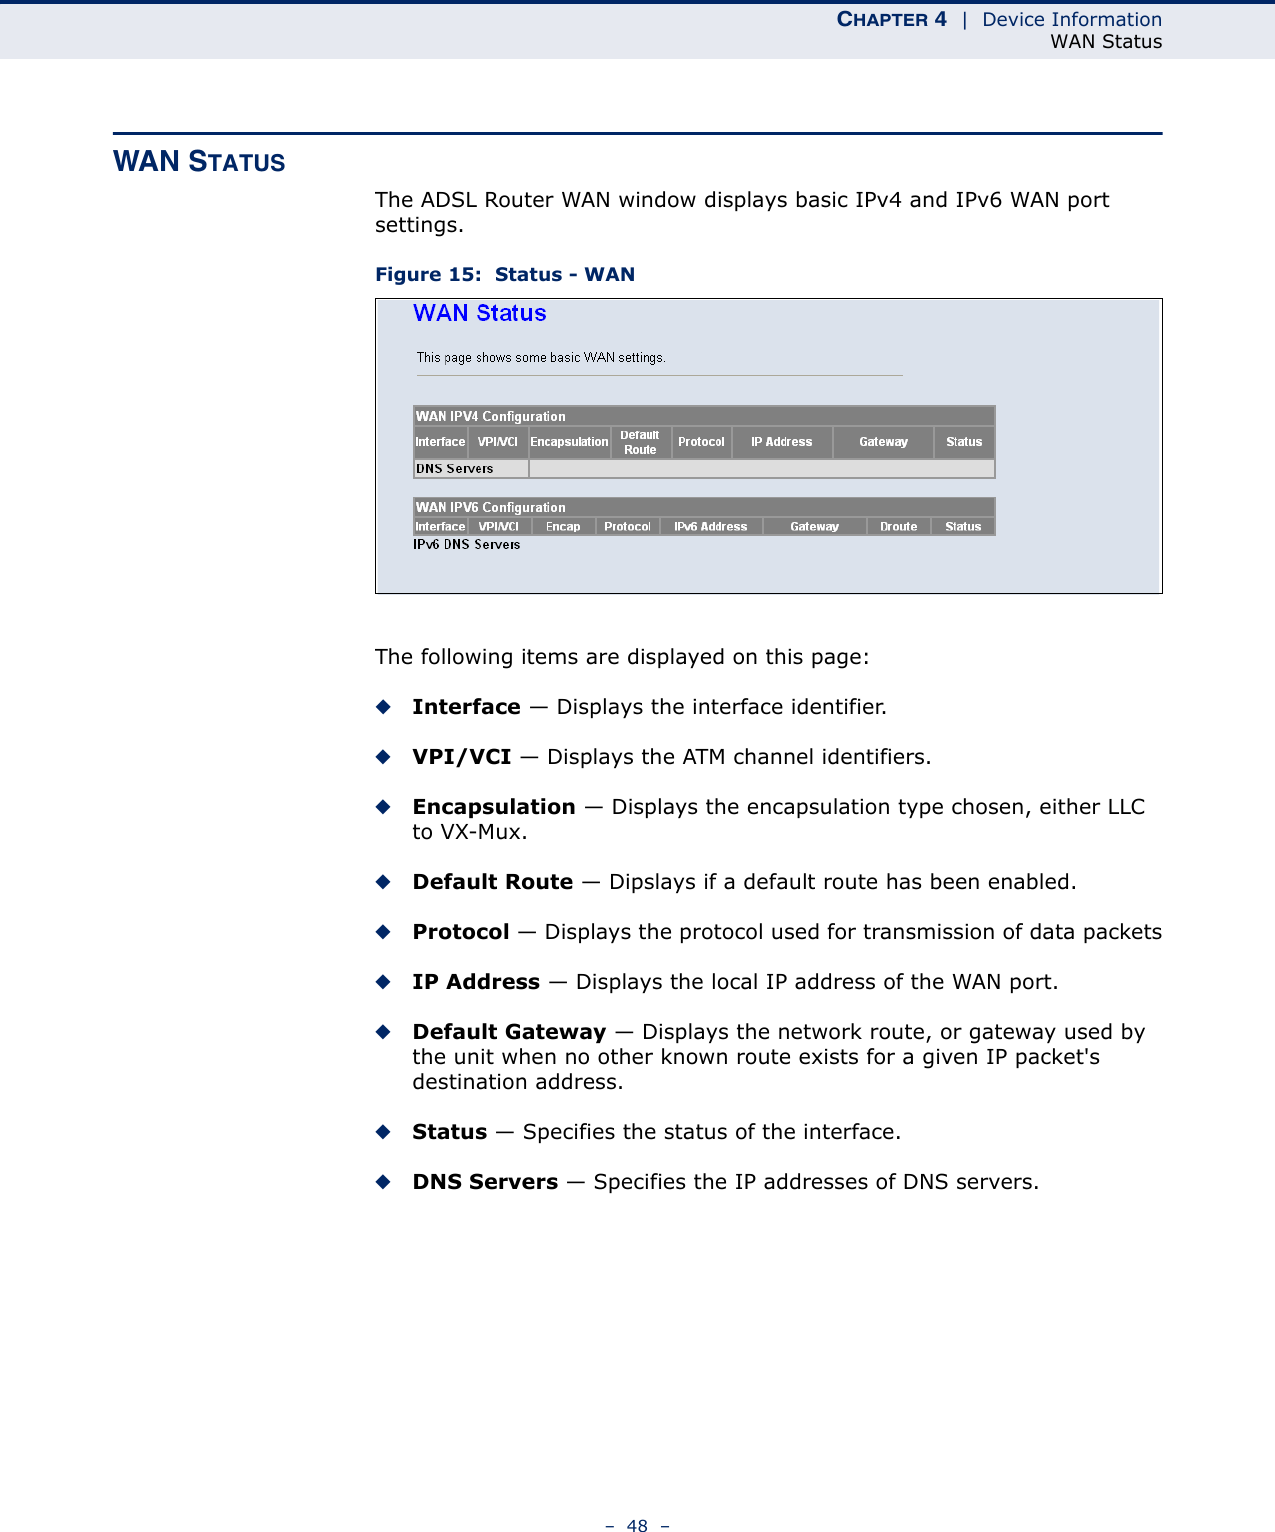 CHAPTER 4  |  Device InformationWAN Status–  48  –WAN STATUSThe ADSL Router WAN window displays basic IPv4 and IPv6 WAN port settings.Figure 15:  Status - WANThe following items are displayed on this page:◆Interface — Displays the interface identifier.◆VPI/VCI — Displays the ATM channel identifiers.◆Encapsulation — Displays the encapsulation type chosen, either LLC to VX-Mux.◆Default Route — Dipslays if a default route has been enabled.◆Protocol — Displays the protocol used for transmission of data packets◆IP Address — Displays the local IP address of the WAN port.◆Default Gateway — Displays the network route, or gateway used by the unit when no other known route exists for a given IP packet&apos;s destination address.◆Status — Specifies the status of the interface.◆DNS Servers — Specifies the IP addresses of DNS servers.